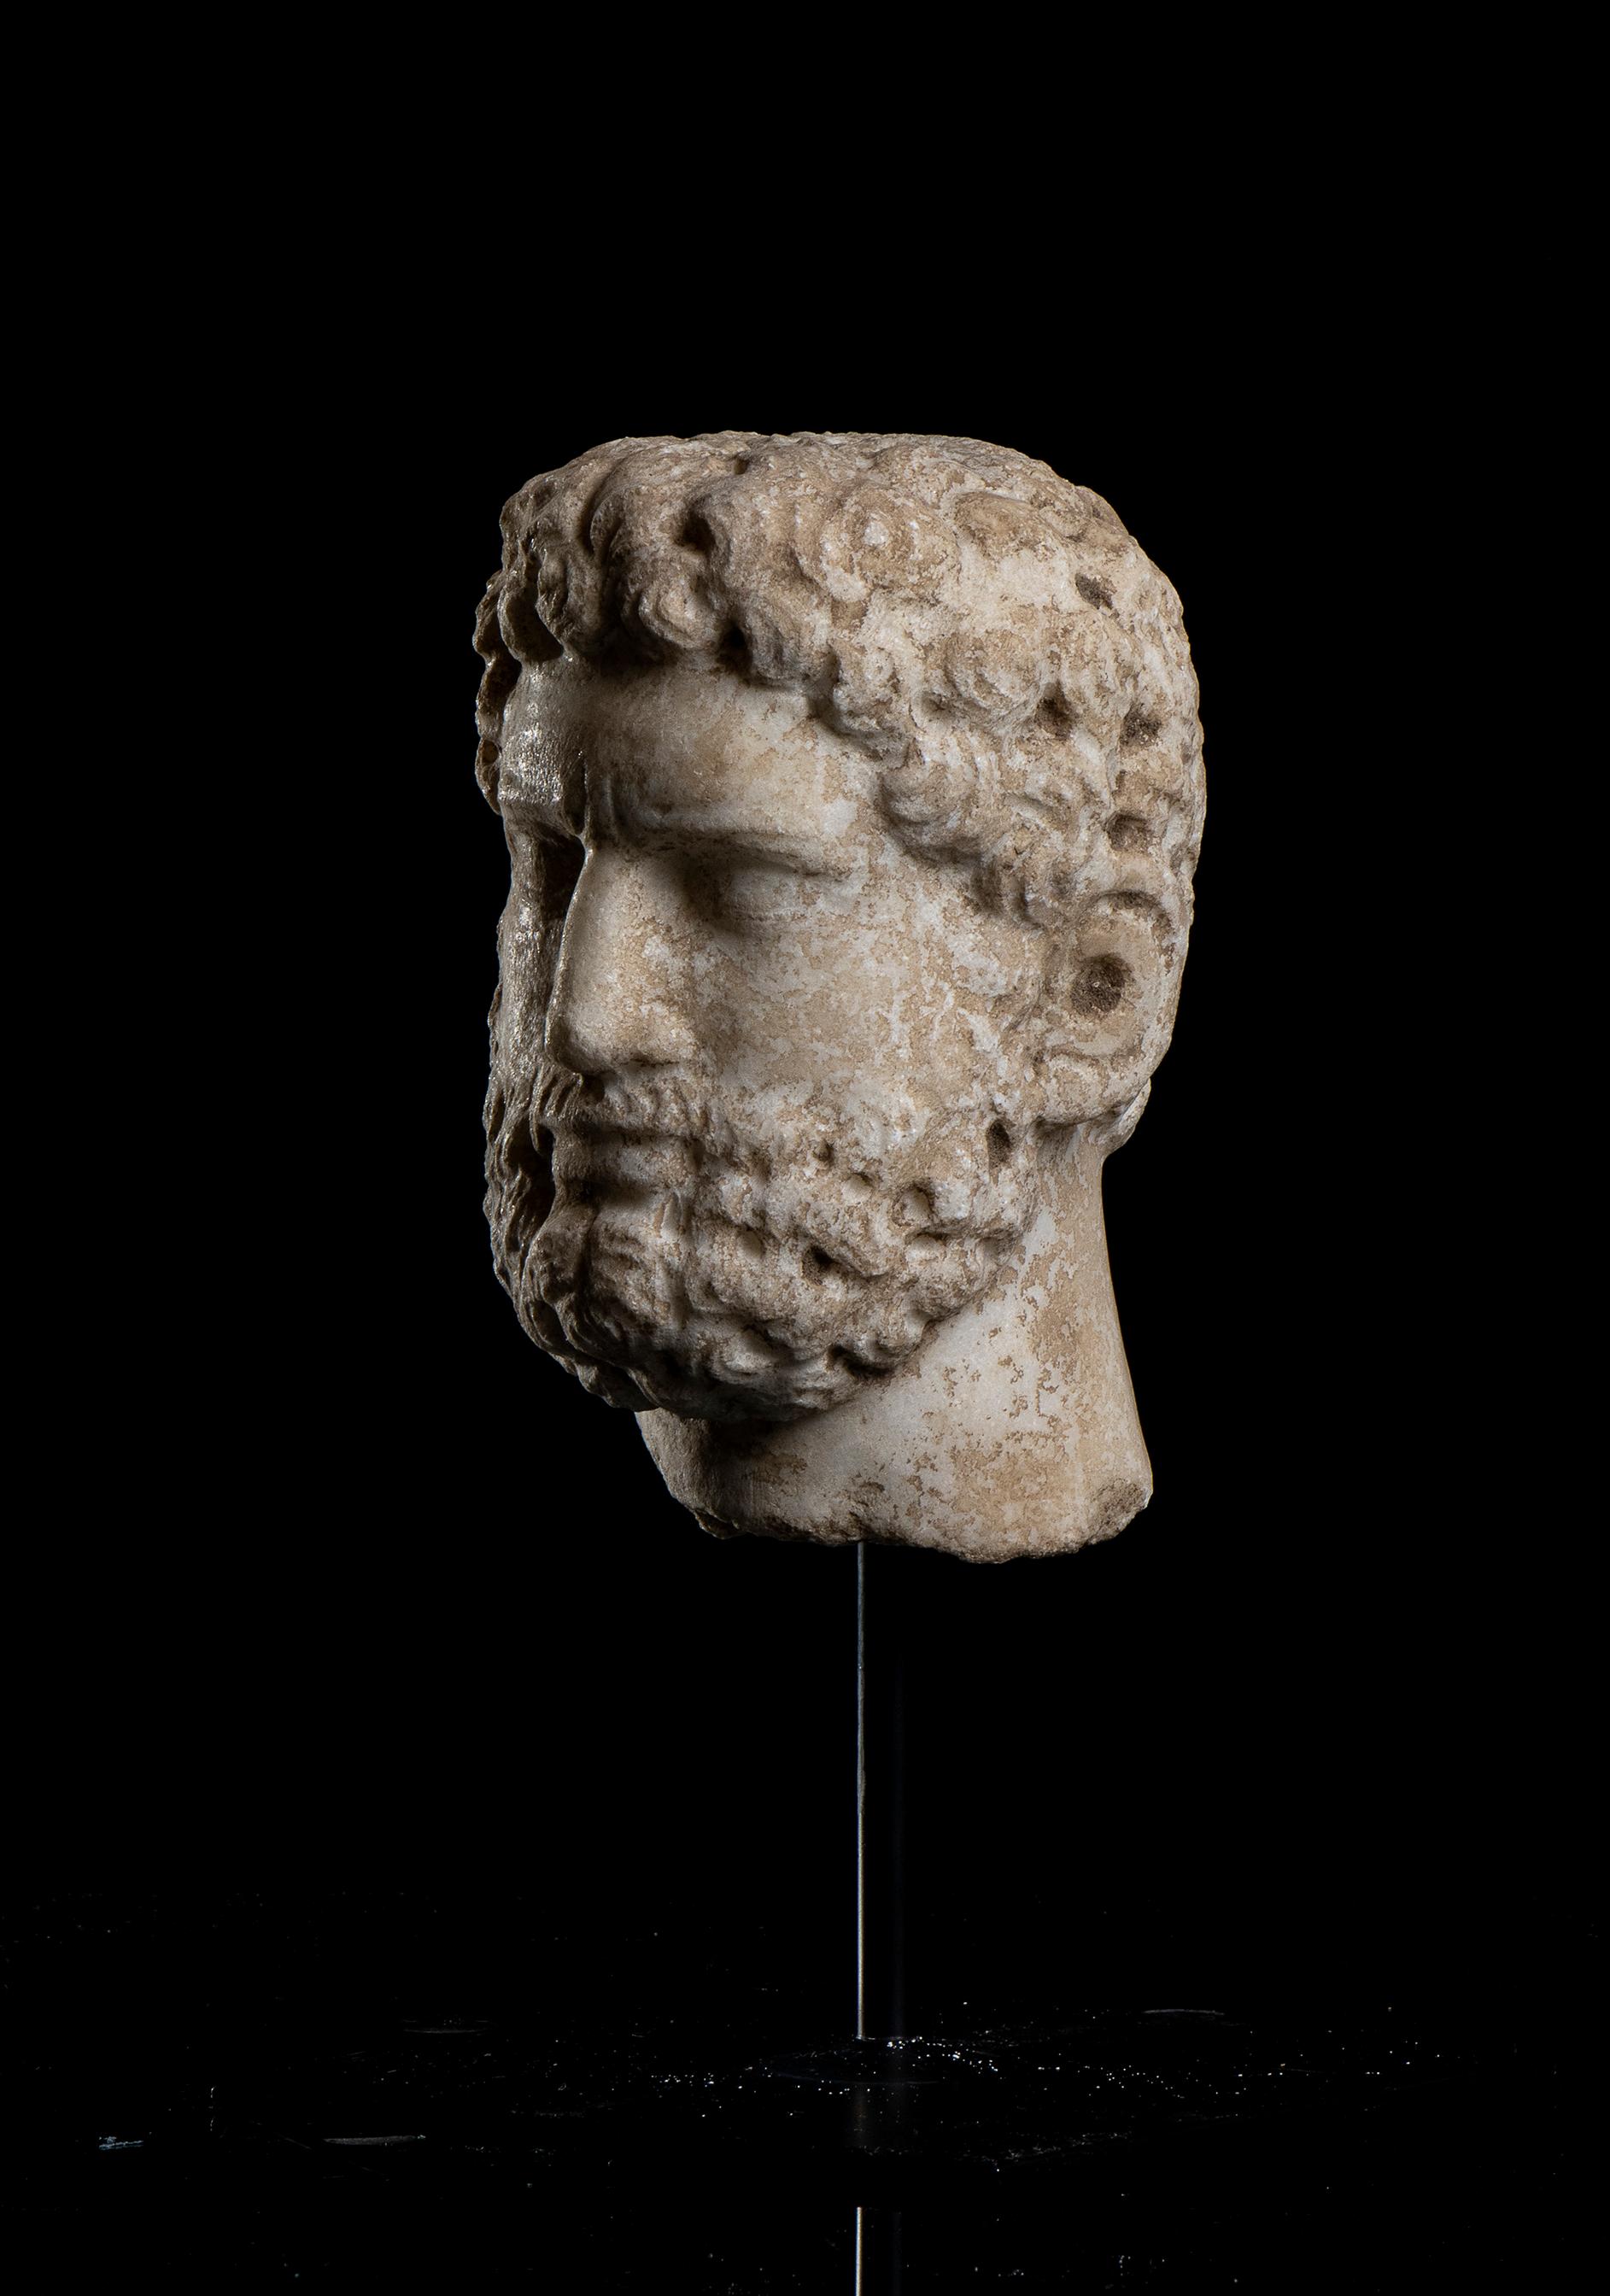 A white marble hand carved head, depicting the portrait of the  Roman Emperor Caracalla, Rome 20th century .
The sculpture standing on a black metal square base with a central pin present a detailed work with an interesting study of detail, clearly